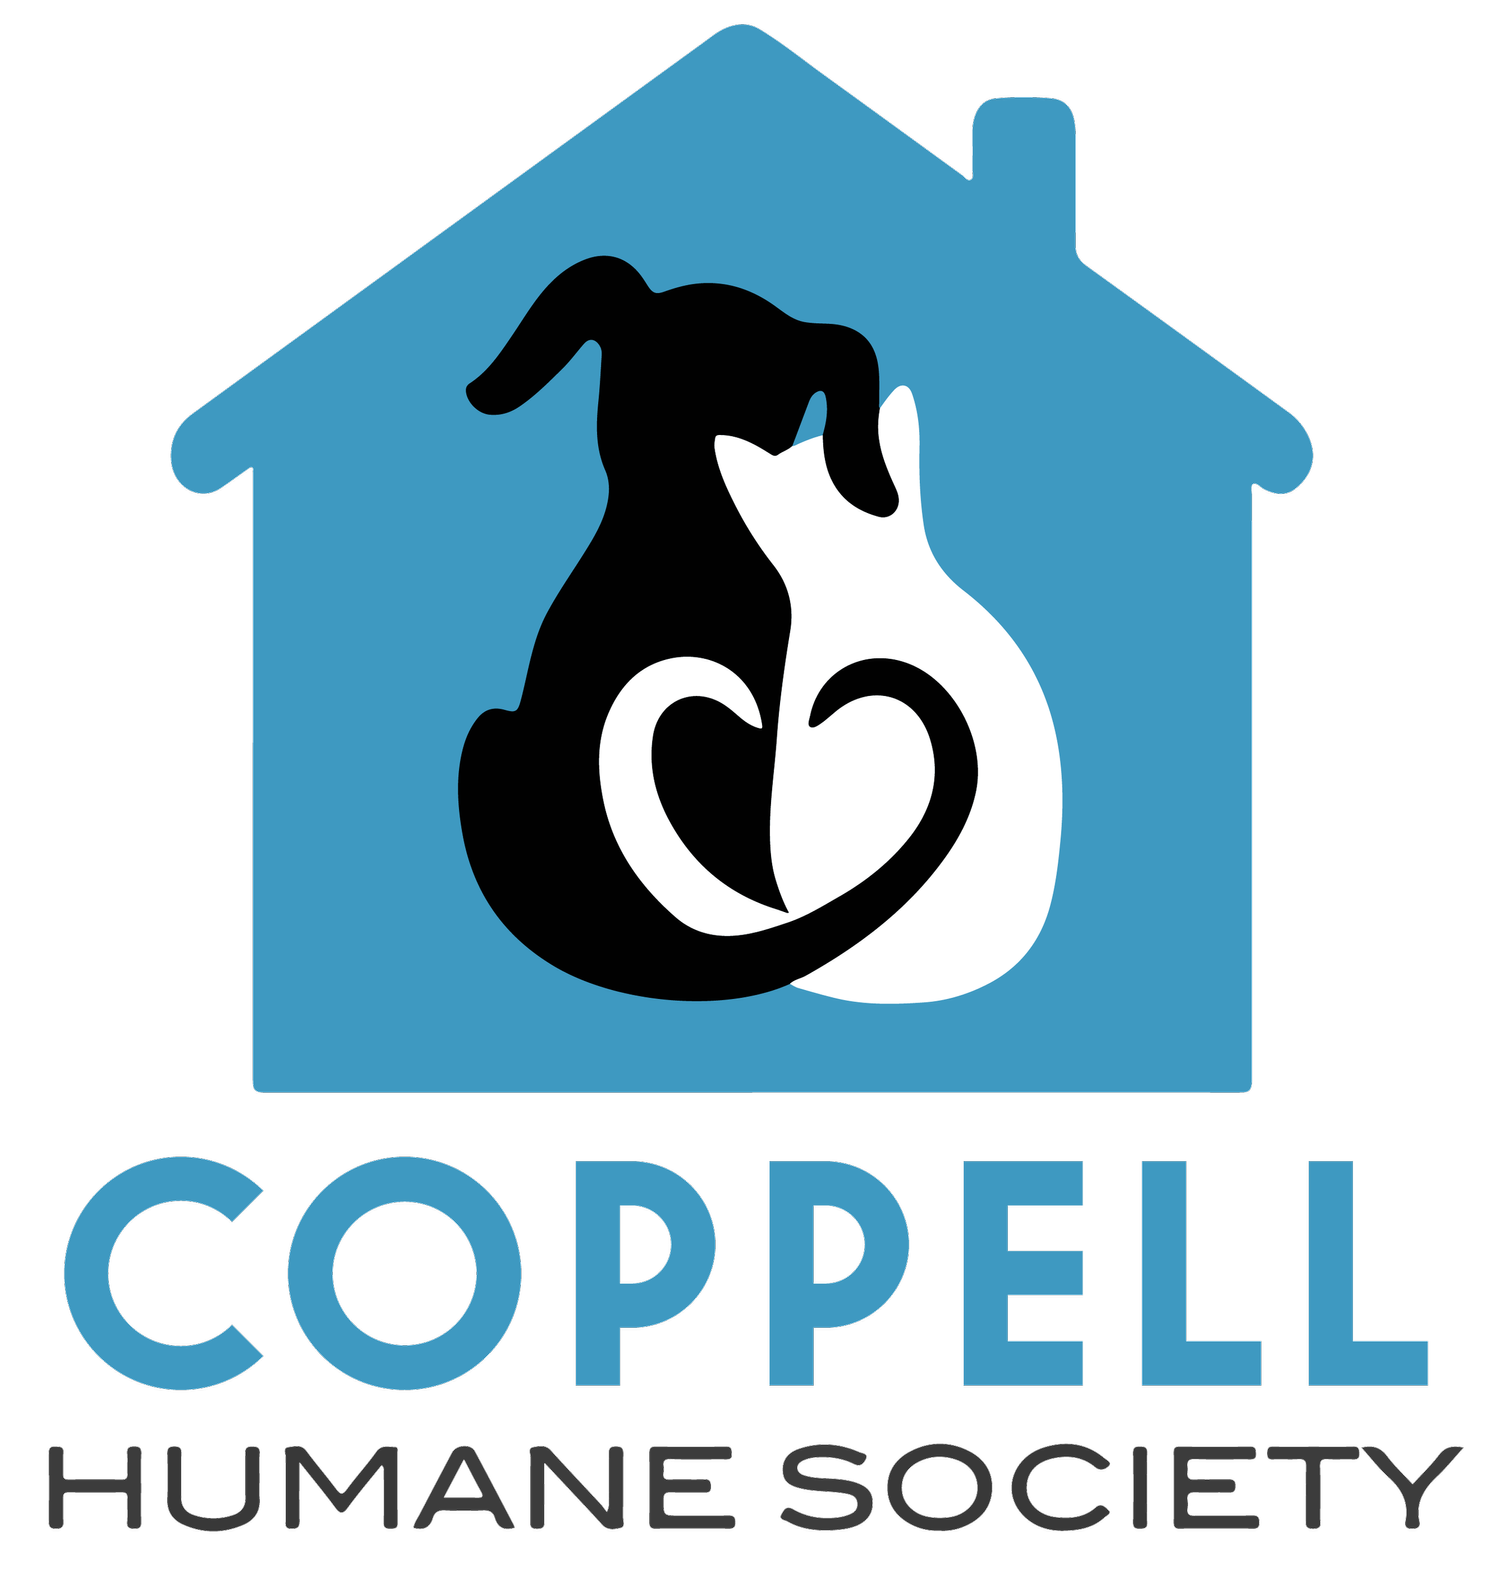 Coppell Humane Society